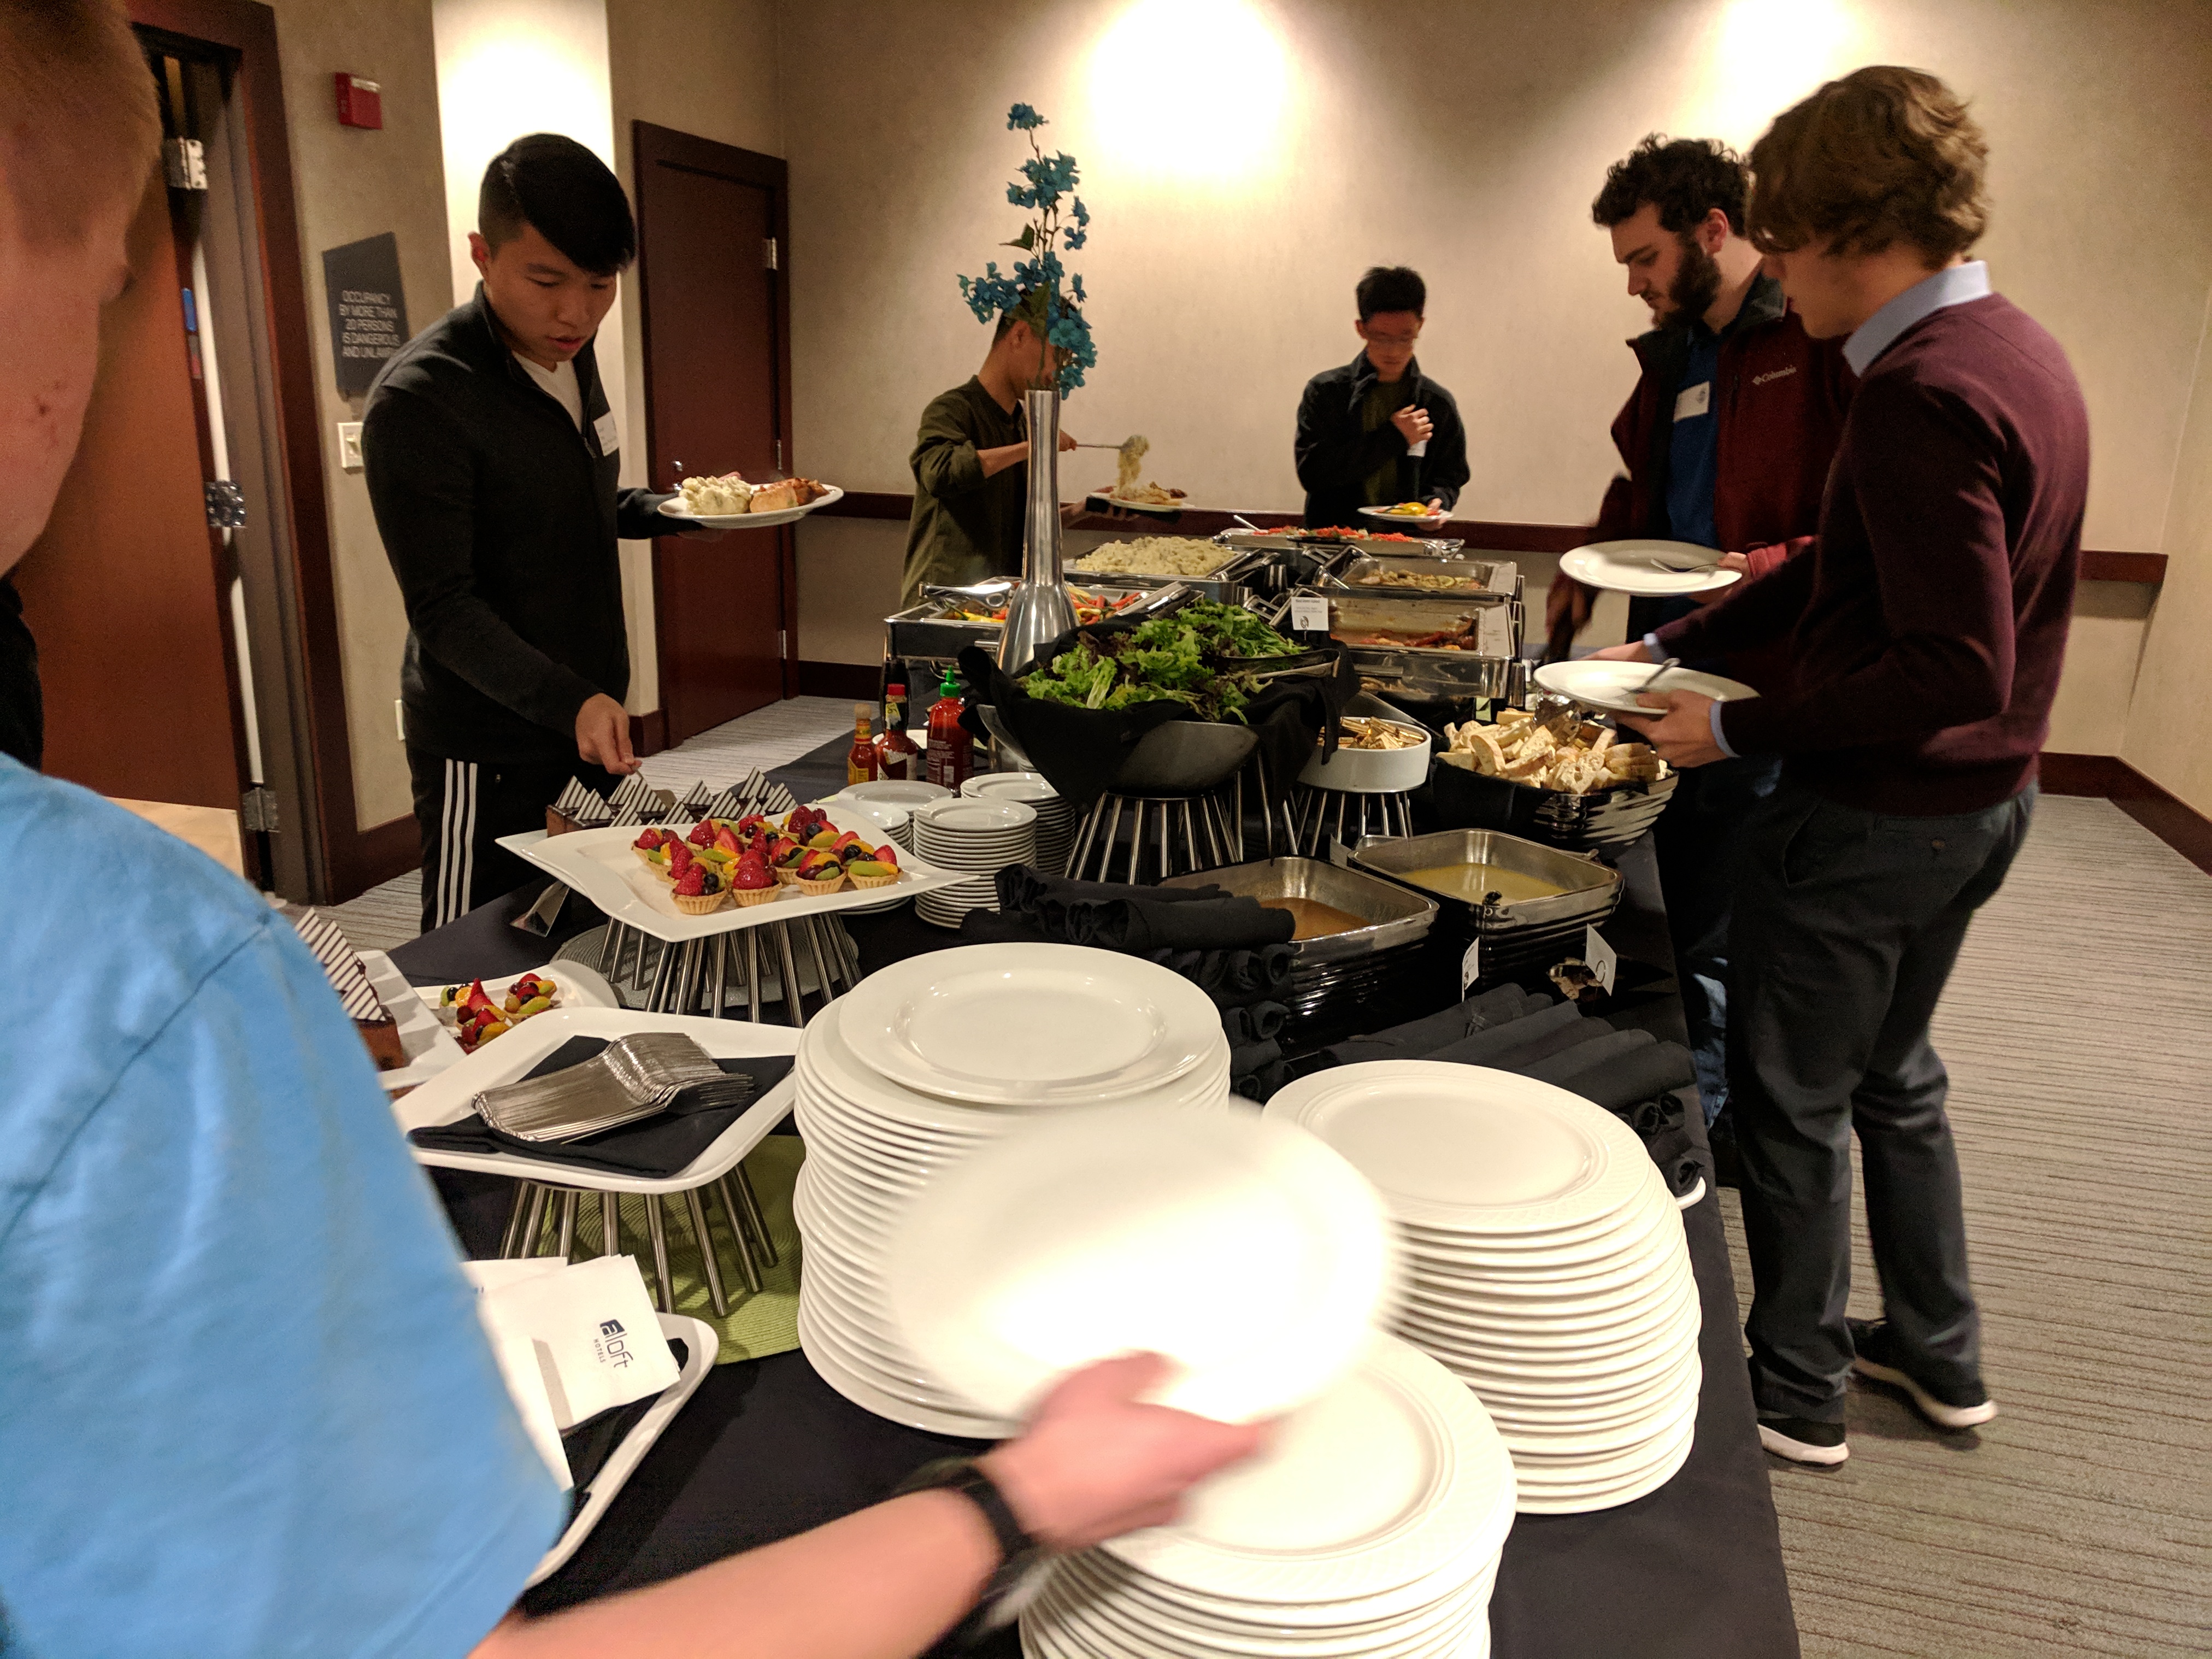 Dinner buffet served on the first day of the hackathon